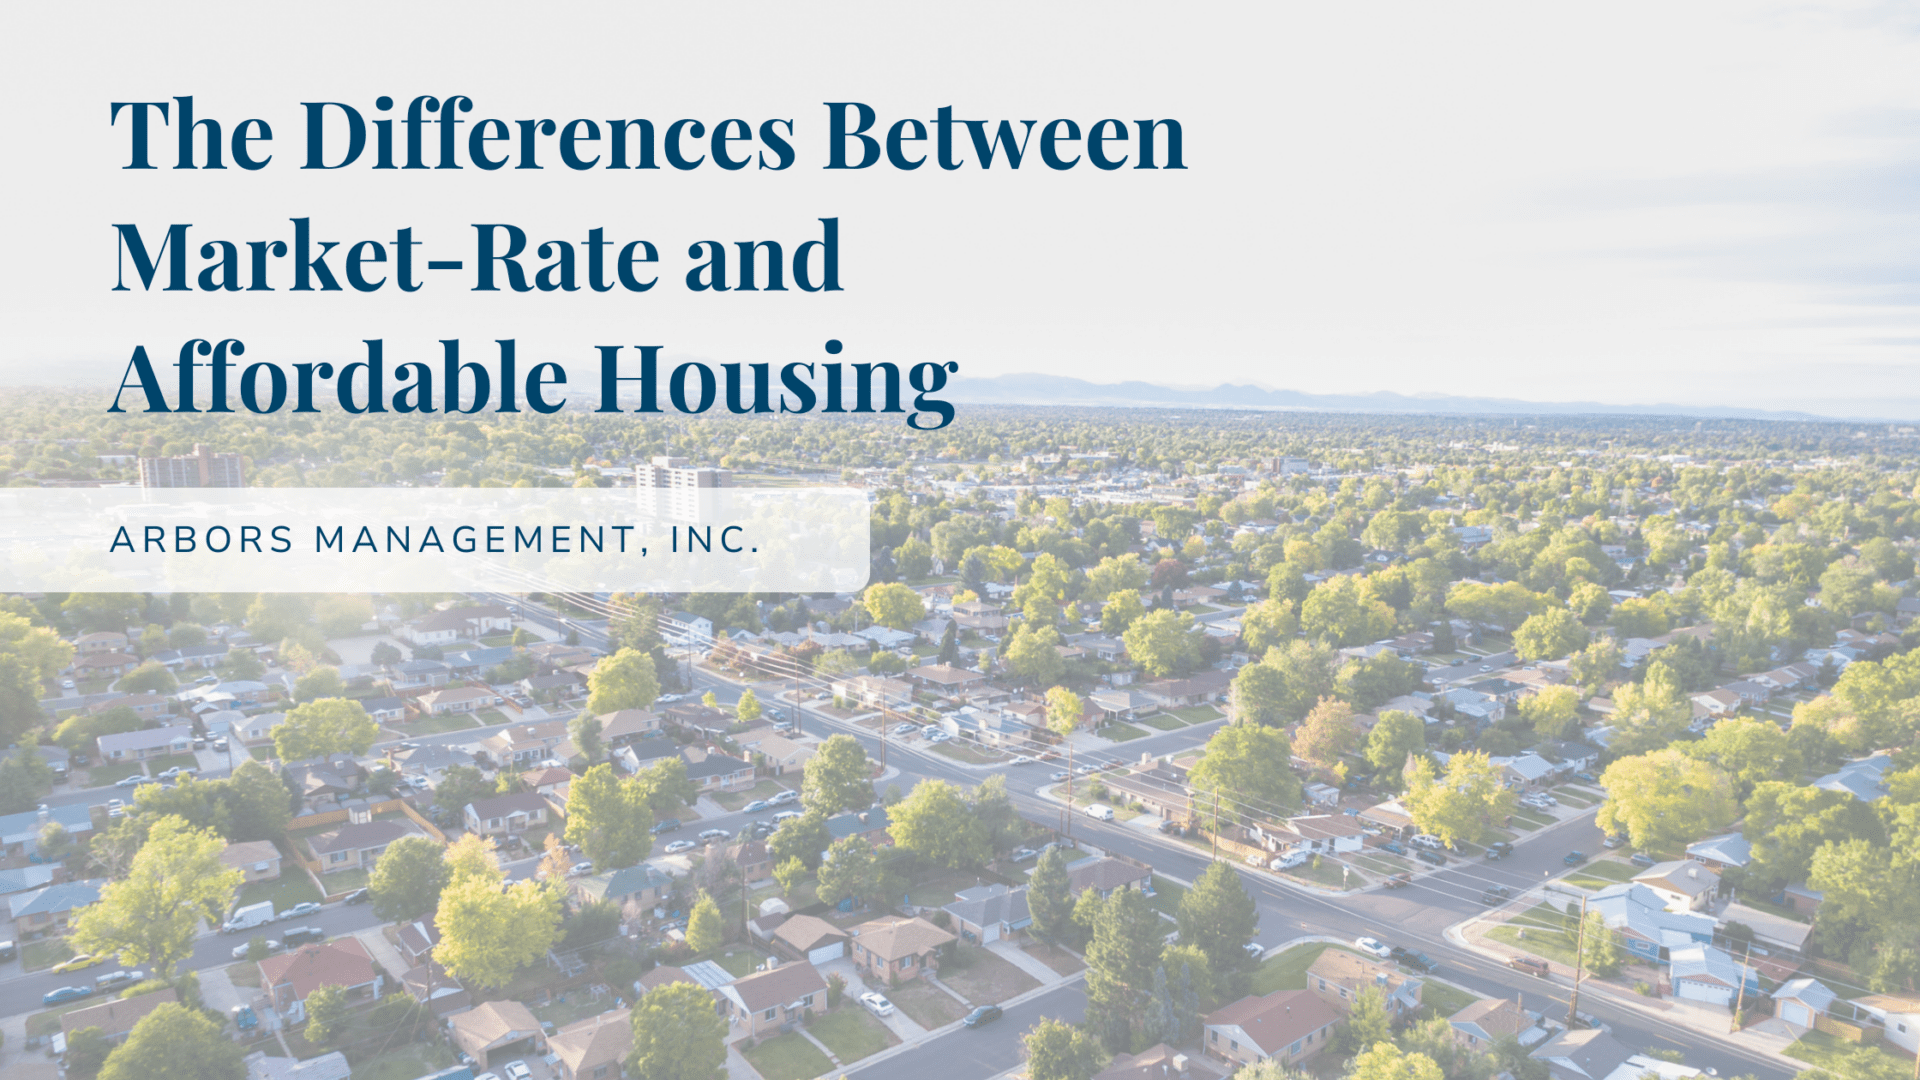 Blog post picture of a suburban neighborhood, titled "The Differences Between Market-Rate and Affordable Housing"